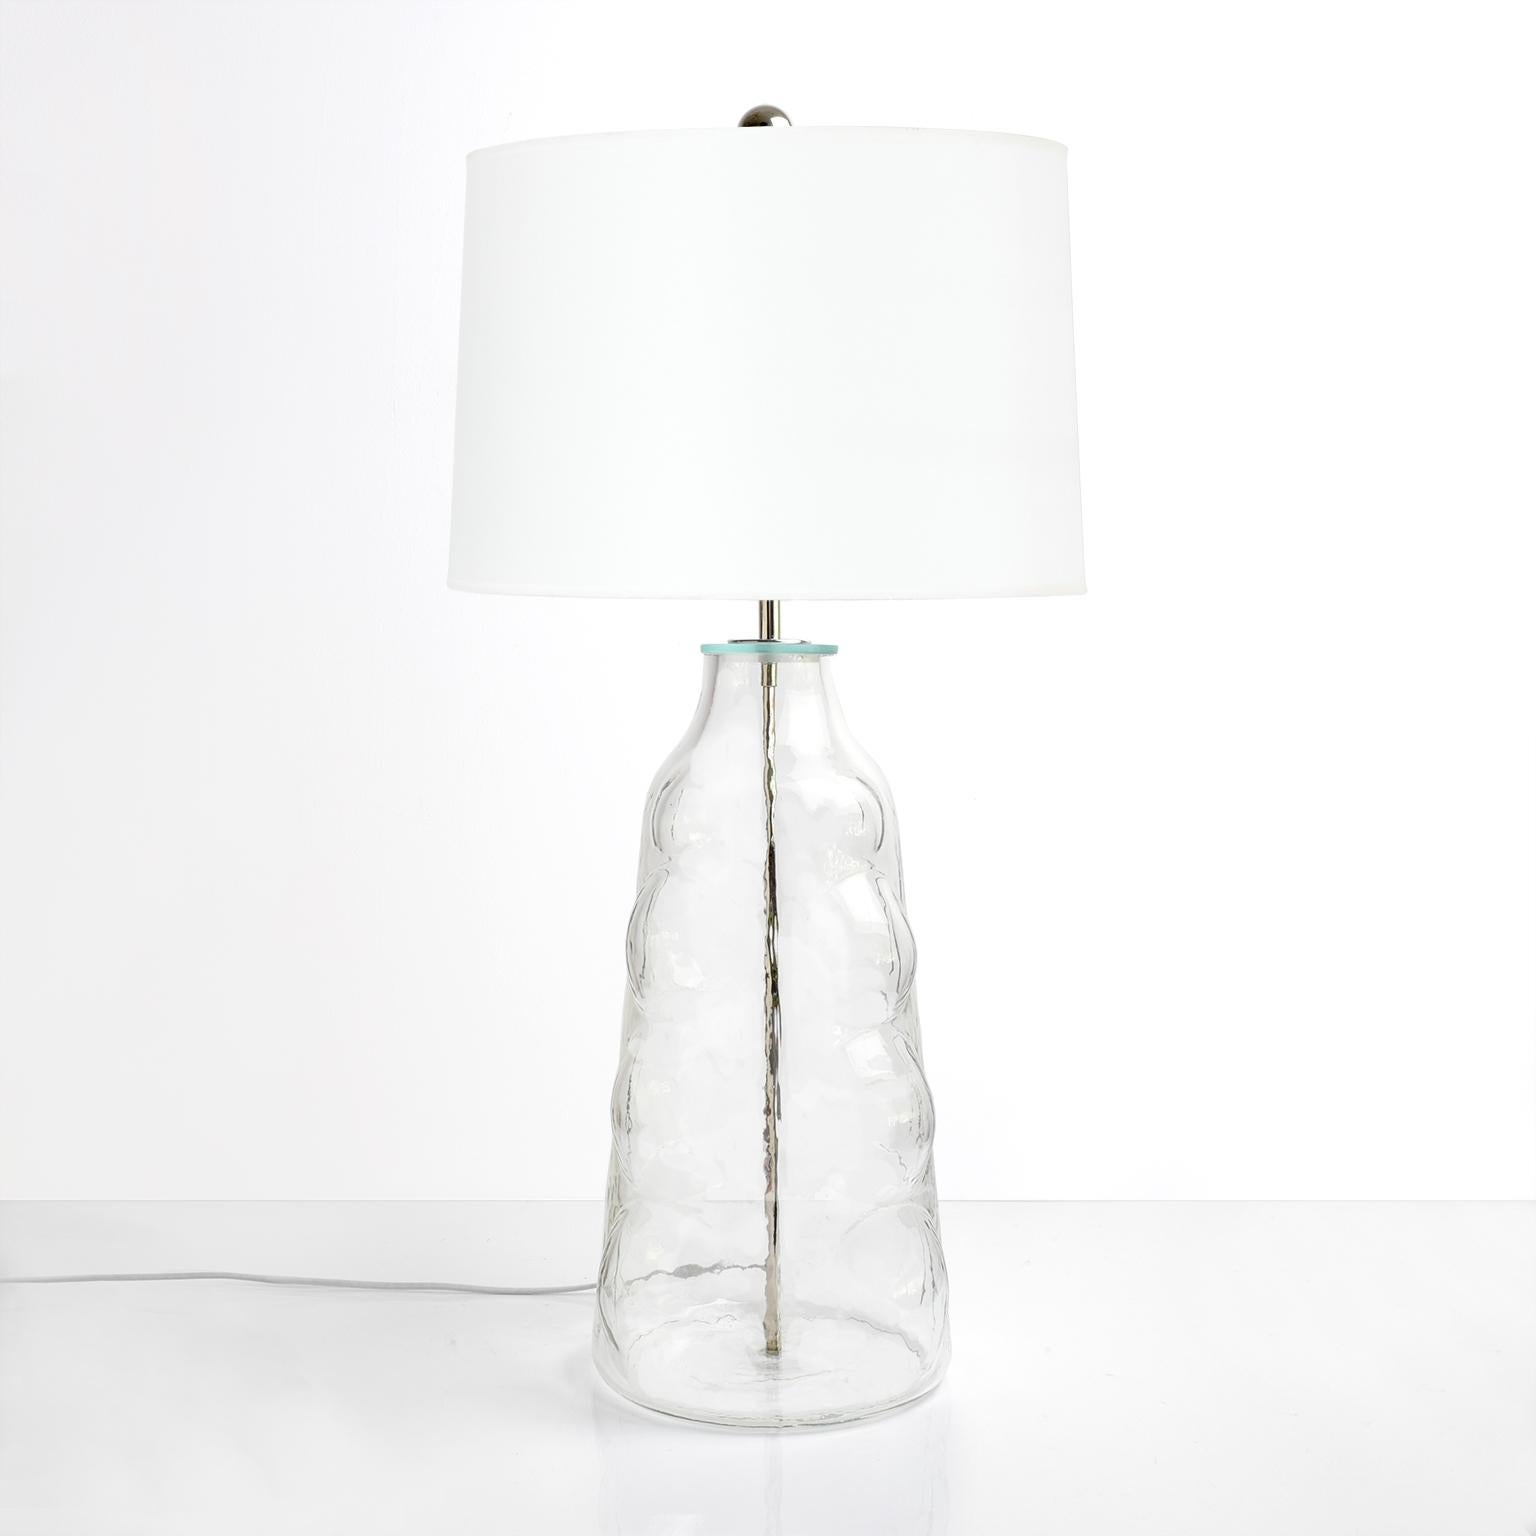 A large-scale Scandinavian Modern clear glass table lamp with raised circular design. Newly rewired with high quality nickel plated double cluster sockets and silk cord. Made by Flygsfors, Sweden, circa 1960.

Measures: Height 32”, diameter 9”.